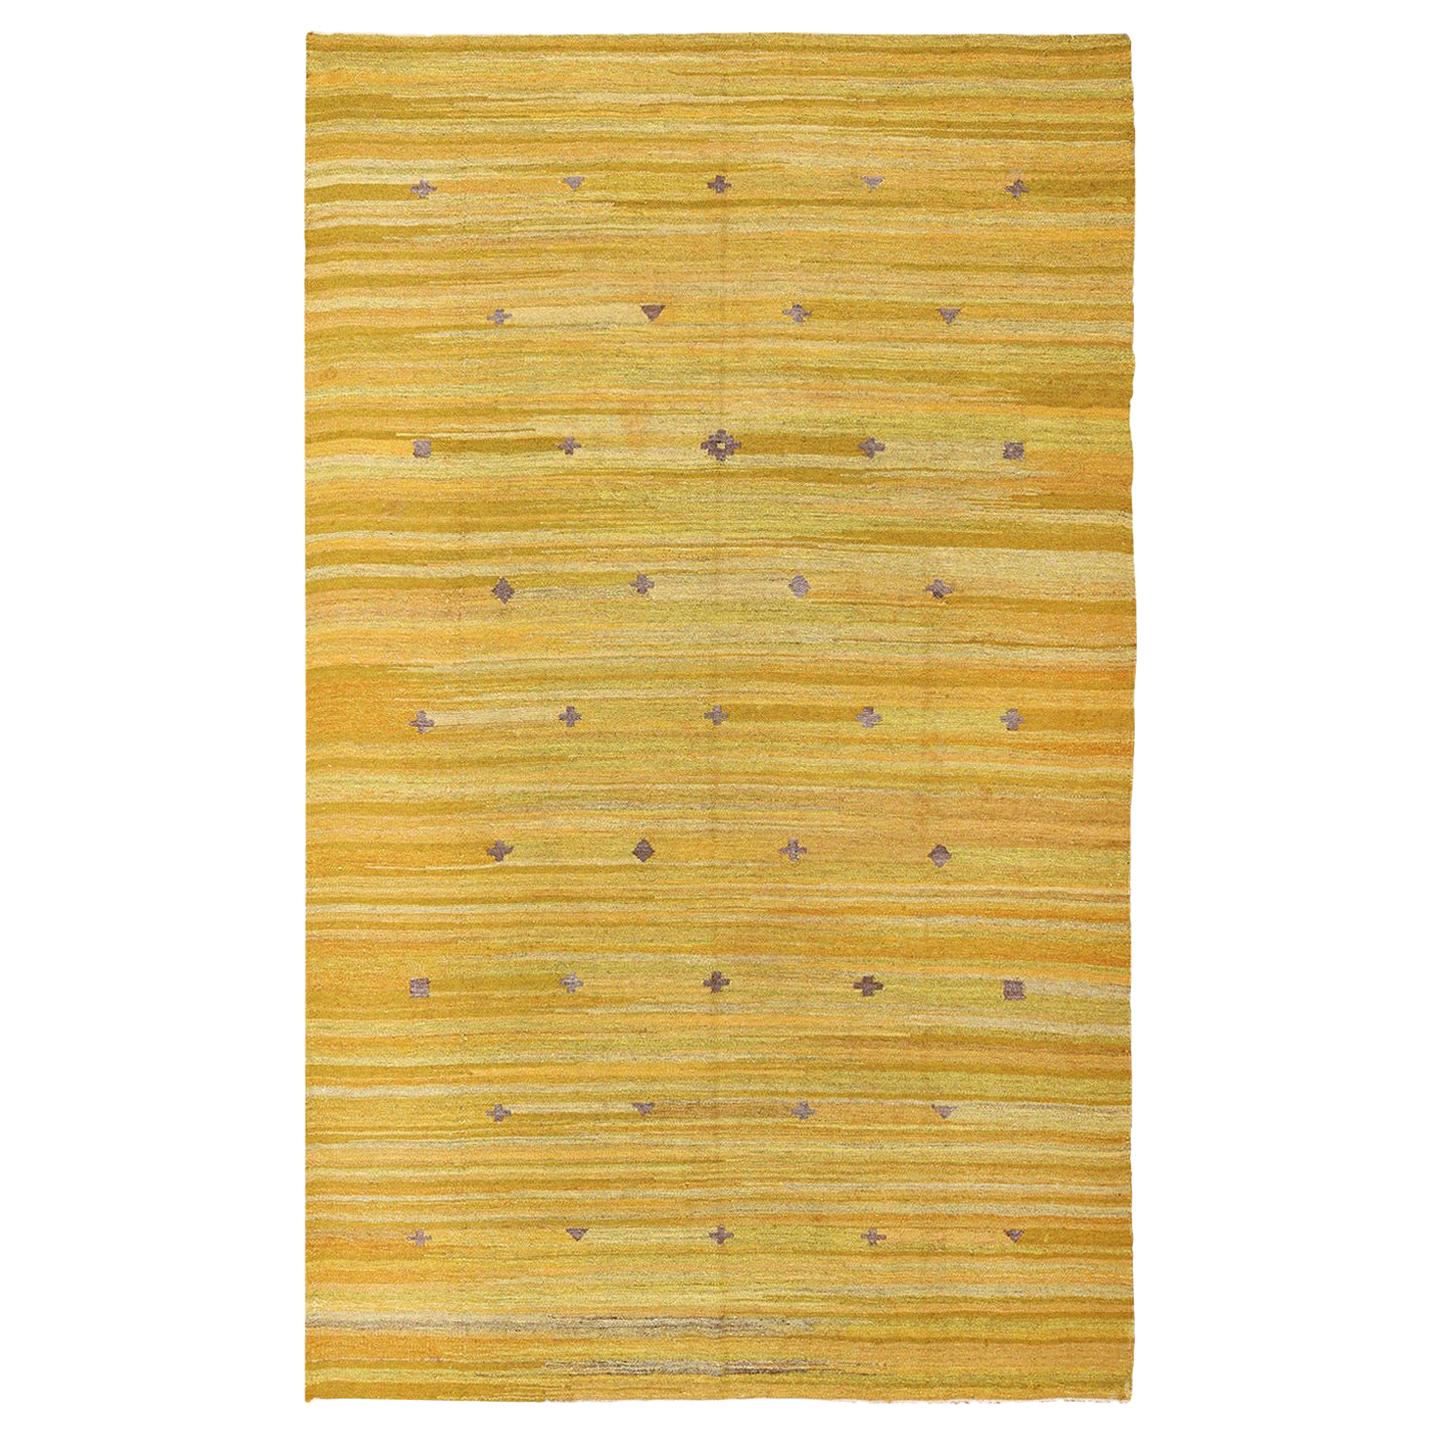 Tapis Kilim scandinave vintage. Taille : 5 ft 7 in x 9 ft 1 in